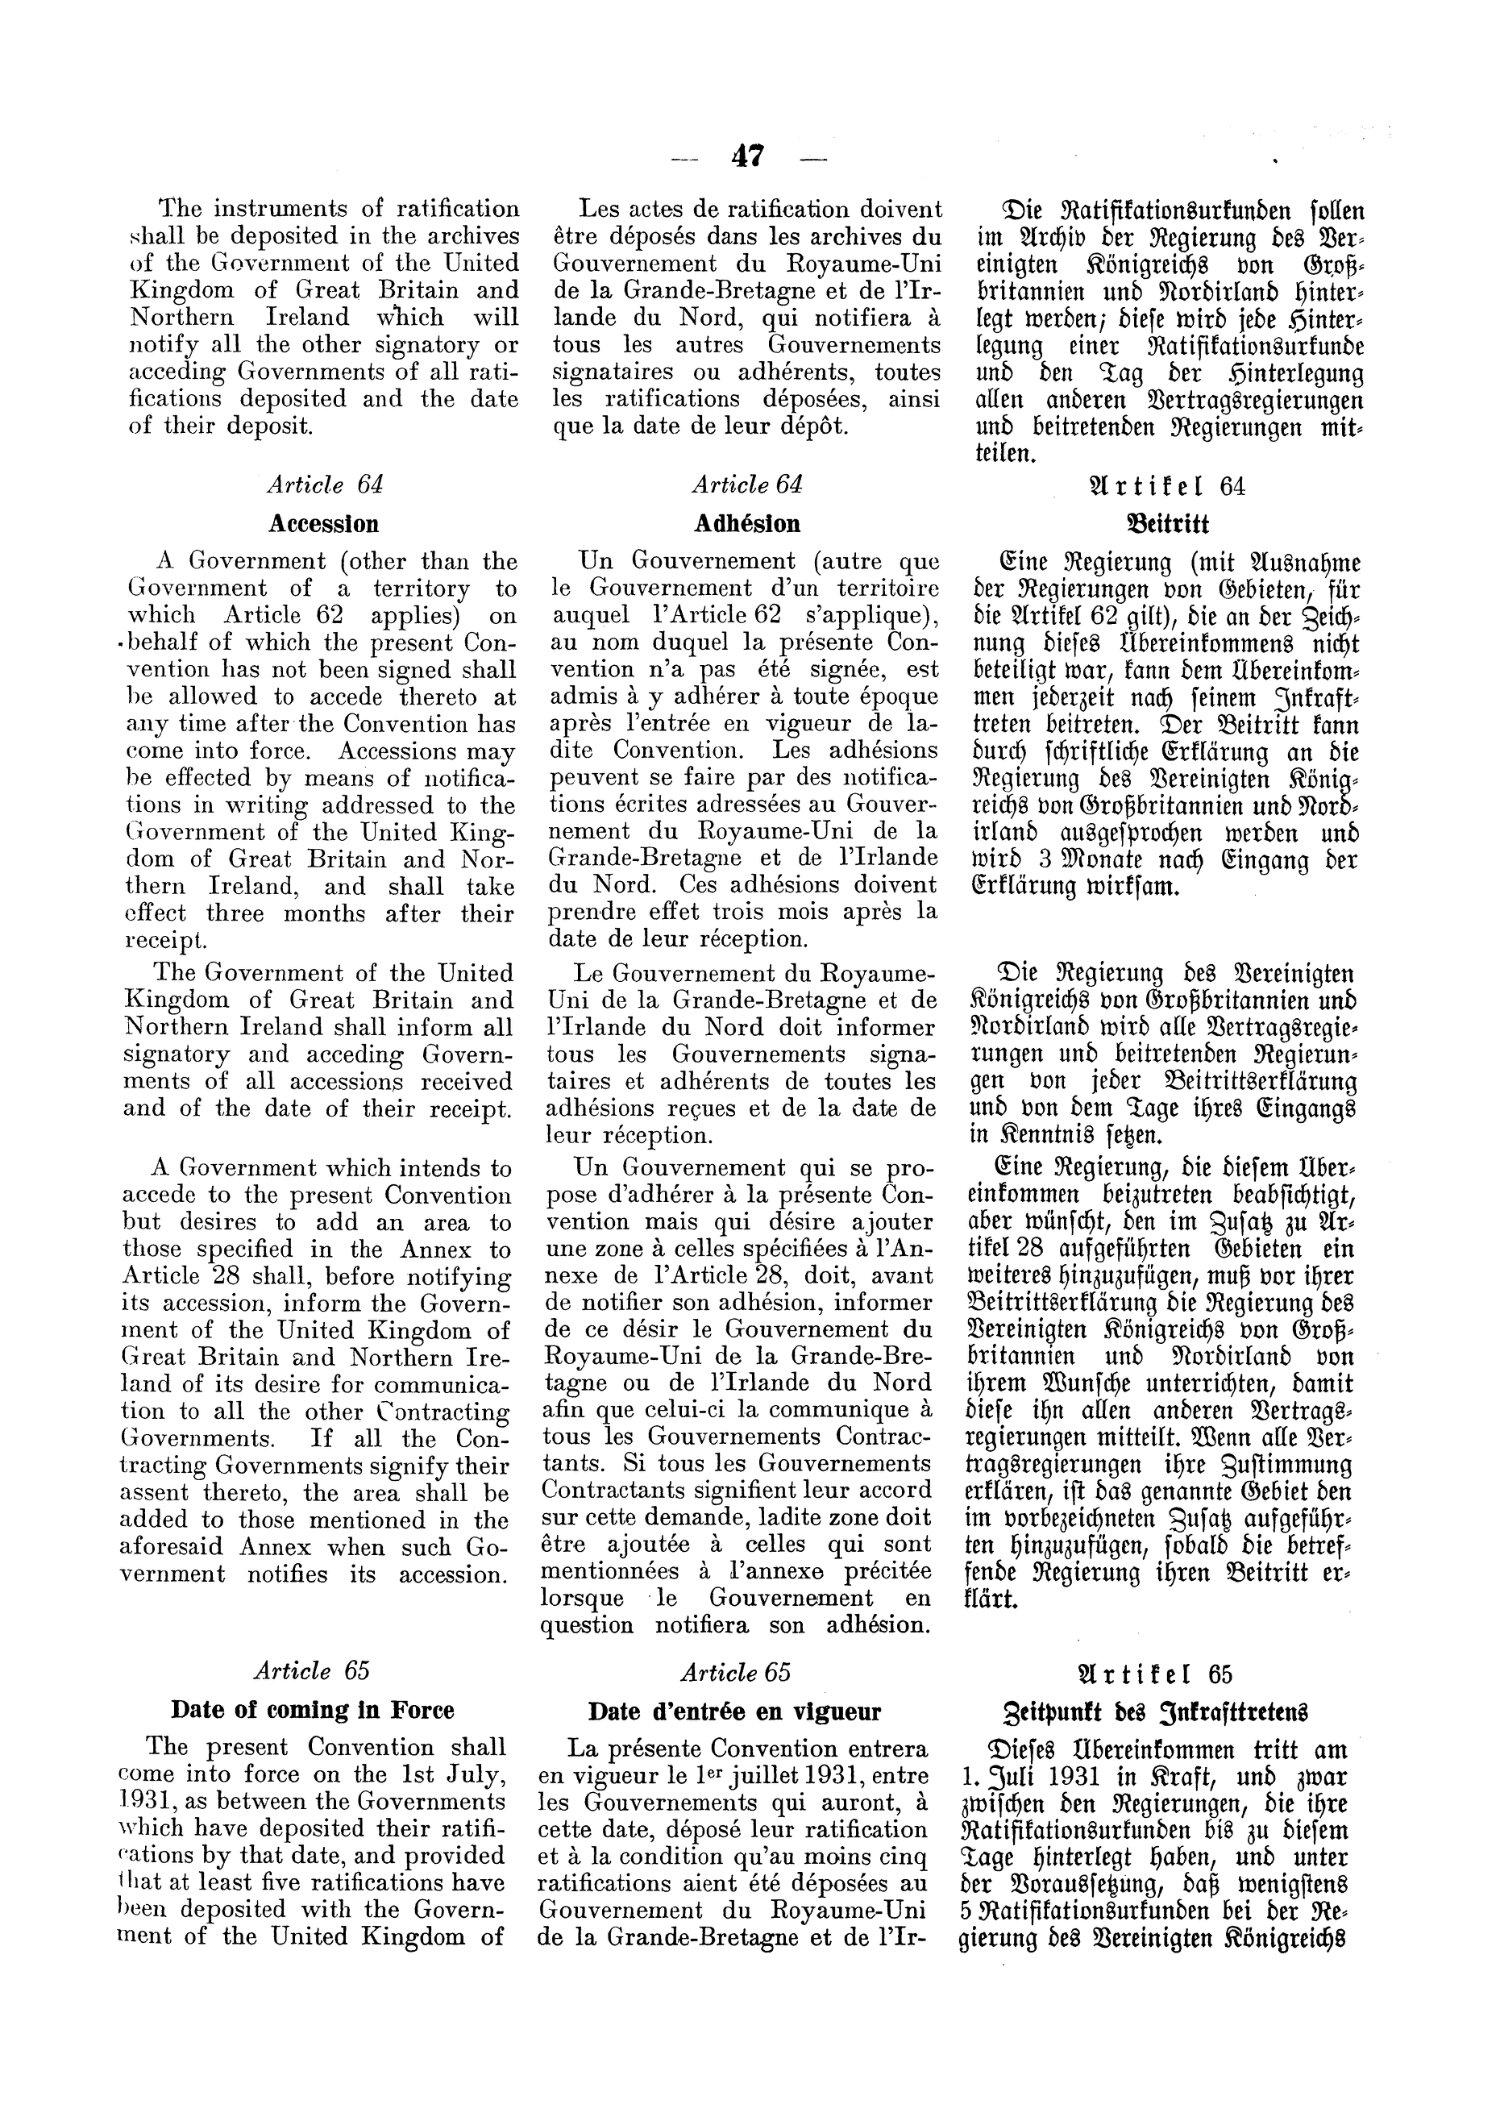 Scan of page 47